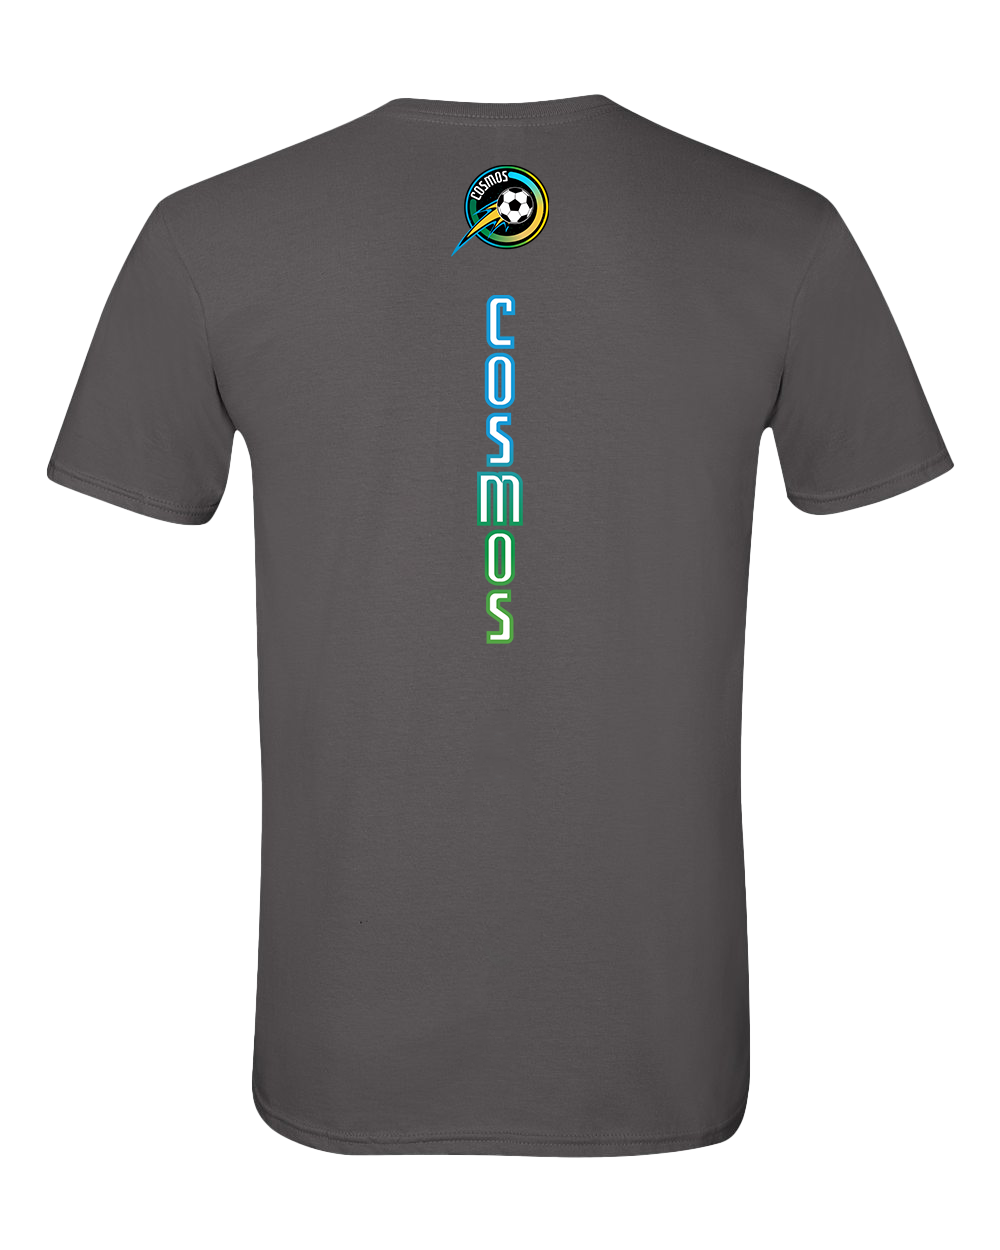 Cosmos Adult T-shirt